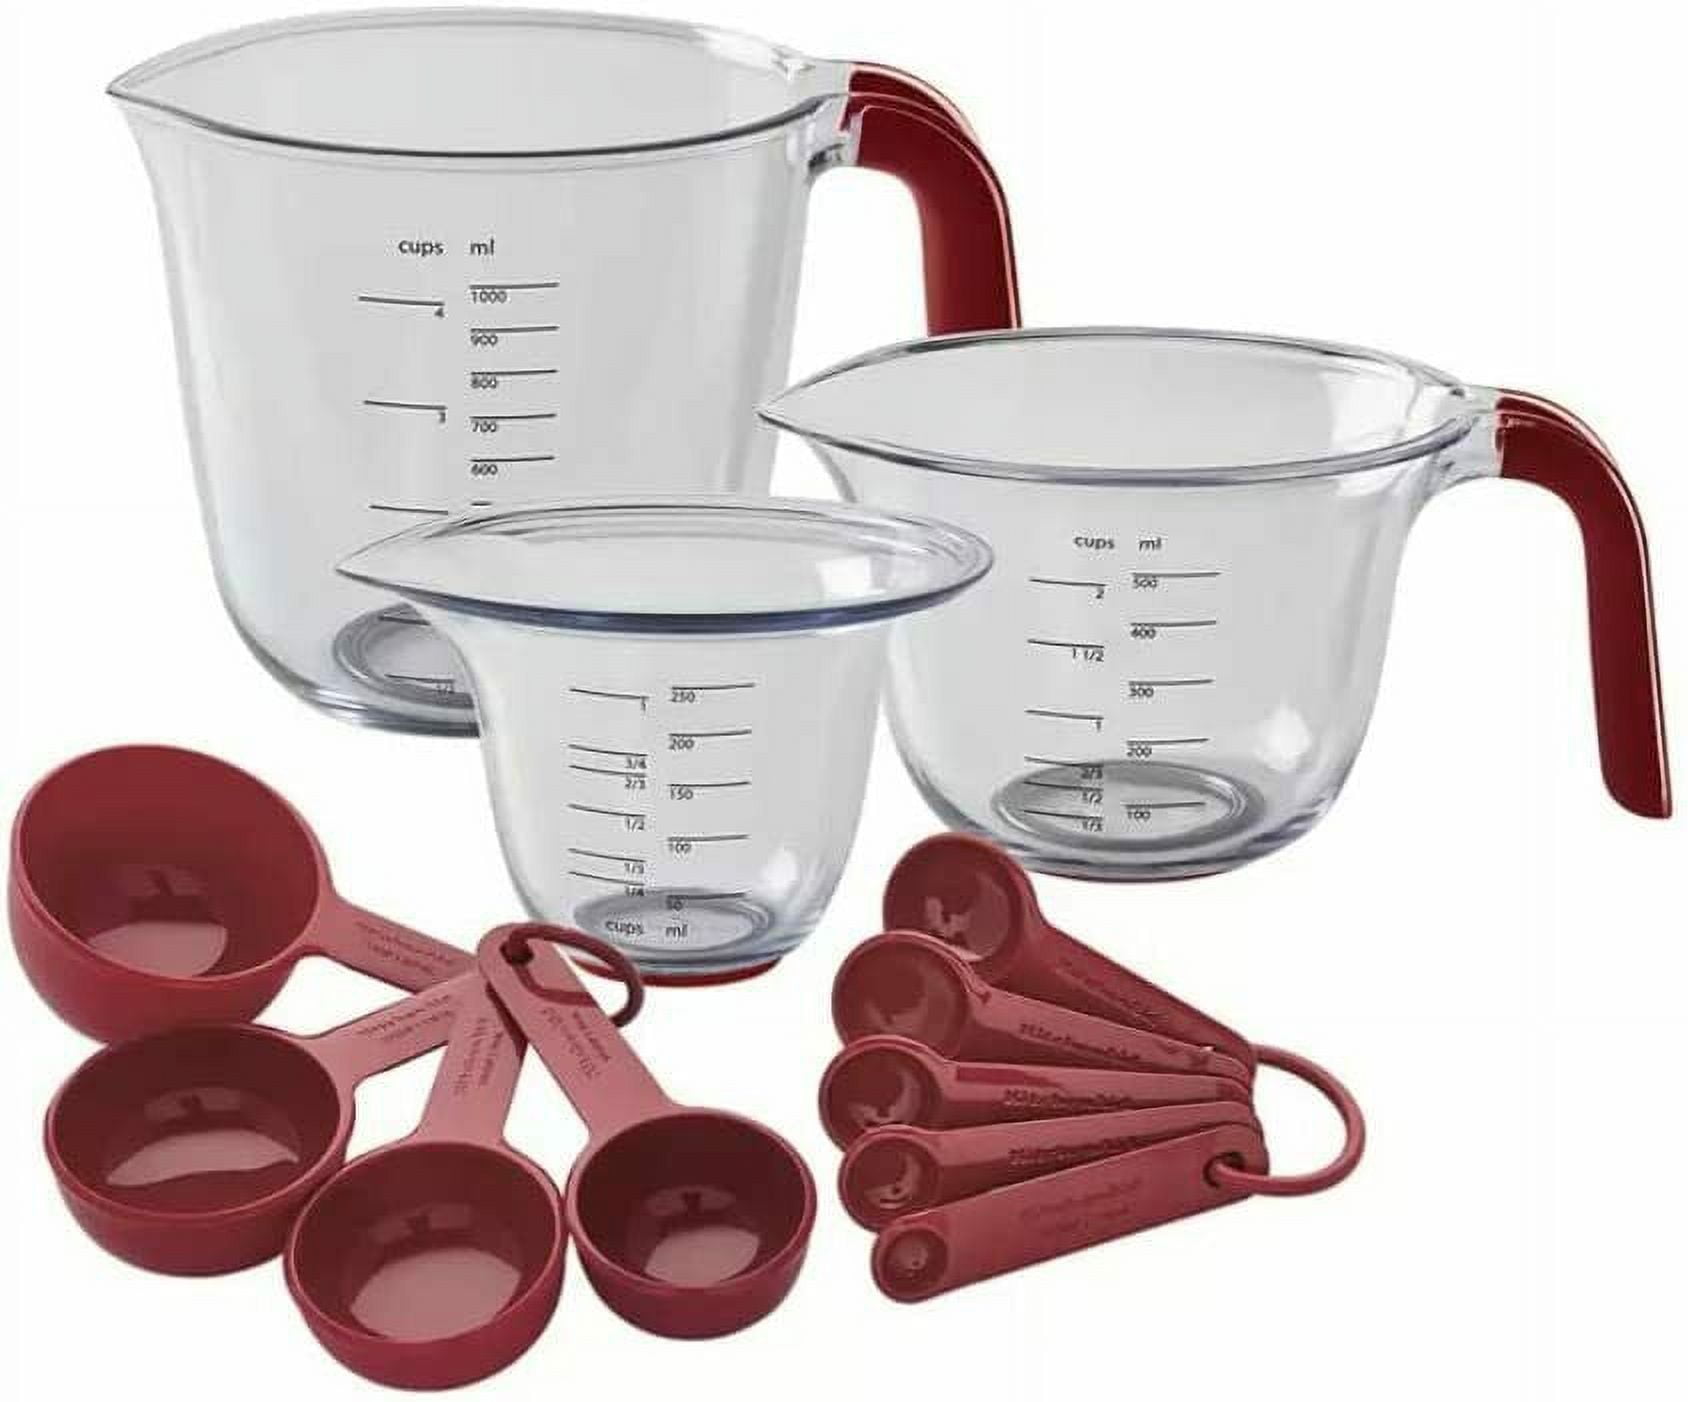 Farberware 12-Piece Measuring Cup and Spoon Set 5152949 - The Home